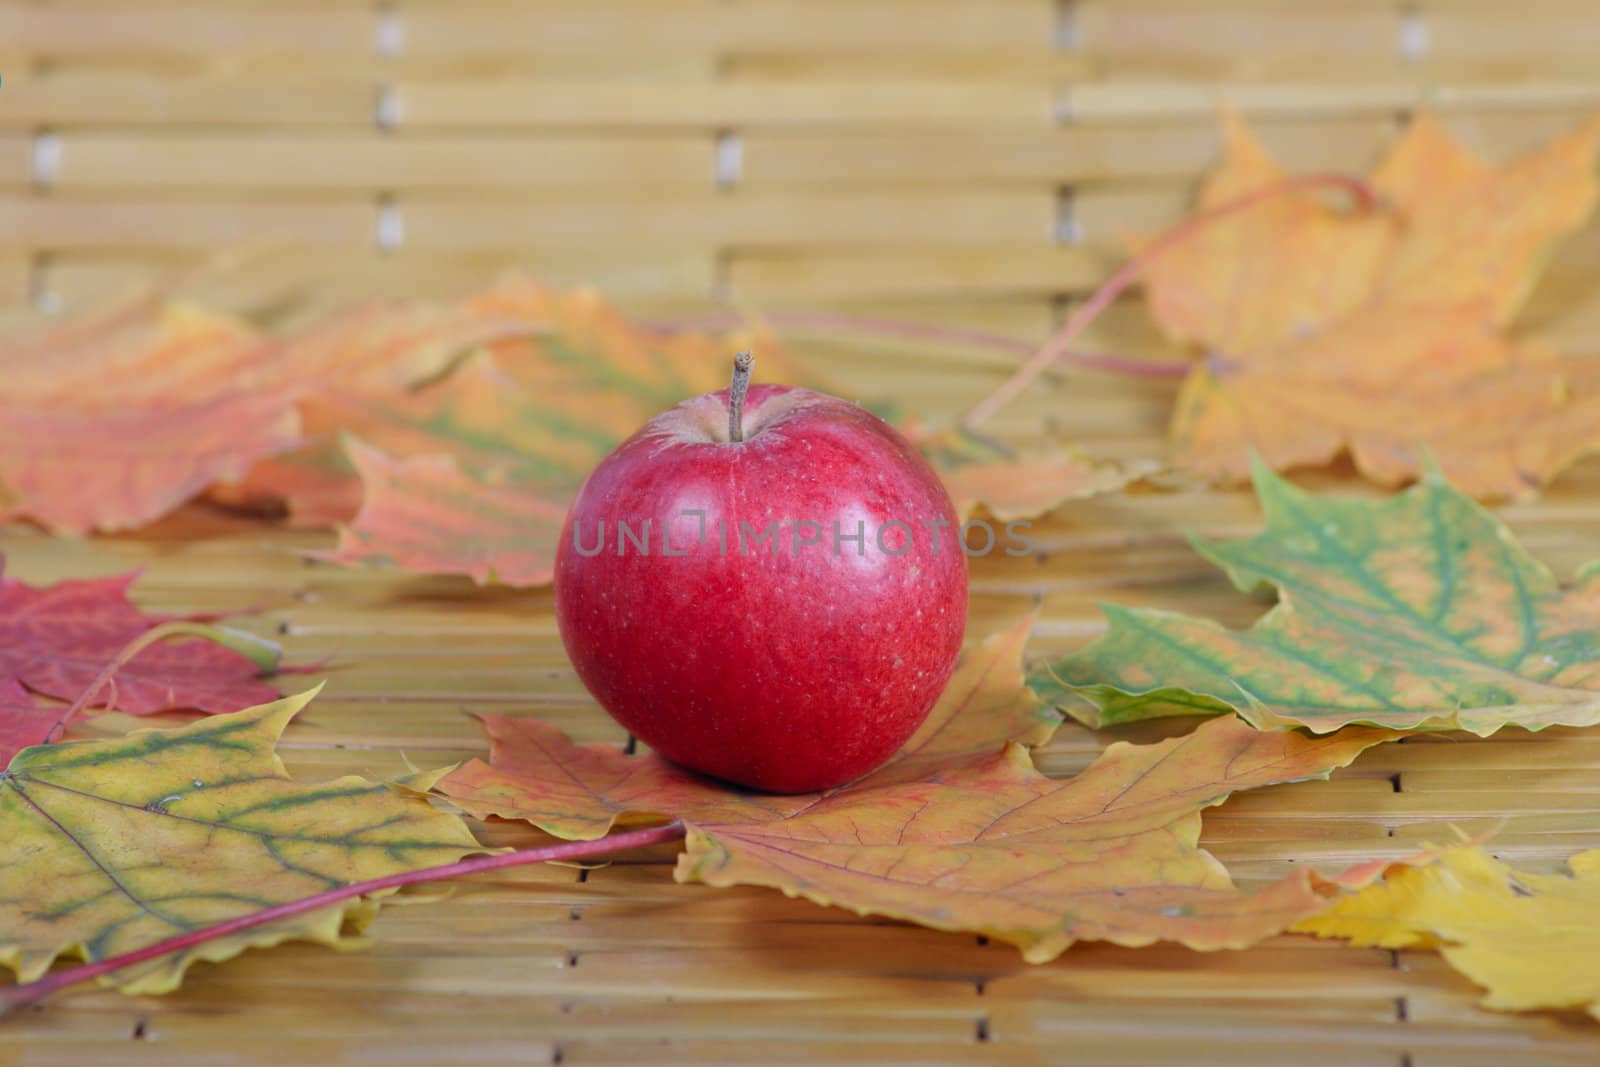 The red apple which has been removed on a bamboo napkin in an environment of autumn leaves